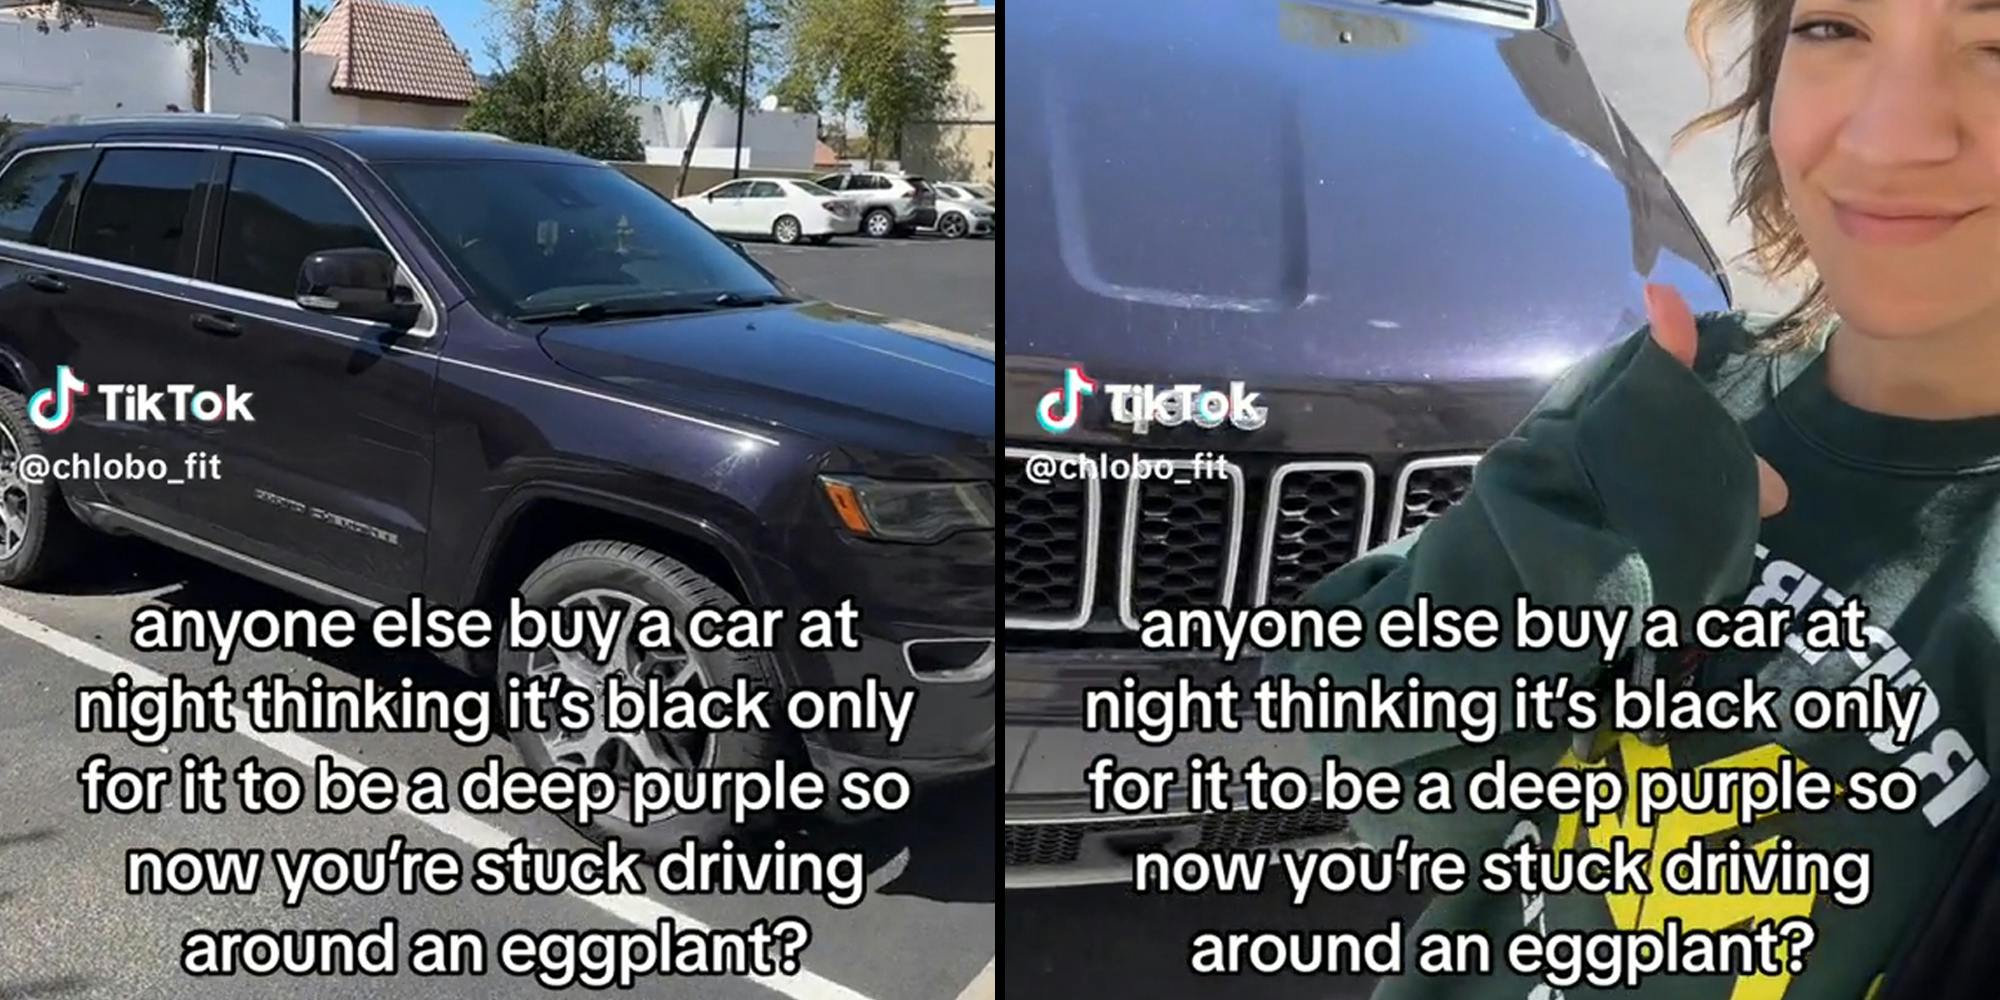 purple jeep in parking lot (l) young woman giving thumbs up (r) caption "anyone else buy a car at night thinking it's black only for it to be a deep purple so now you're stuck driving around an eggplant?"